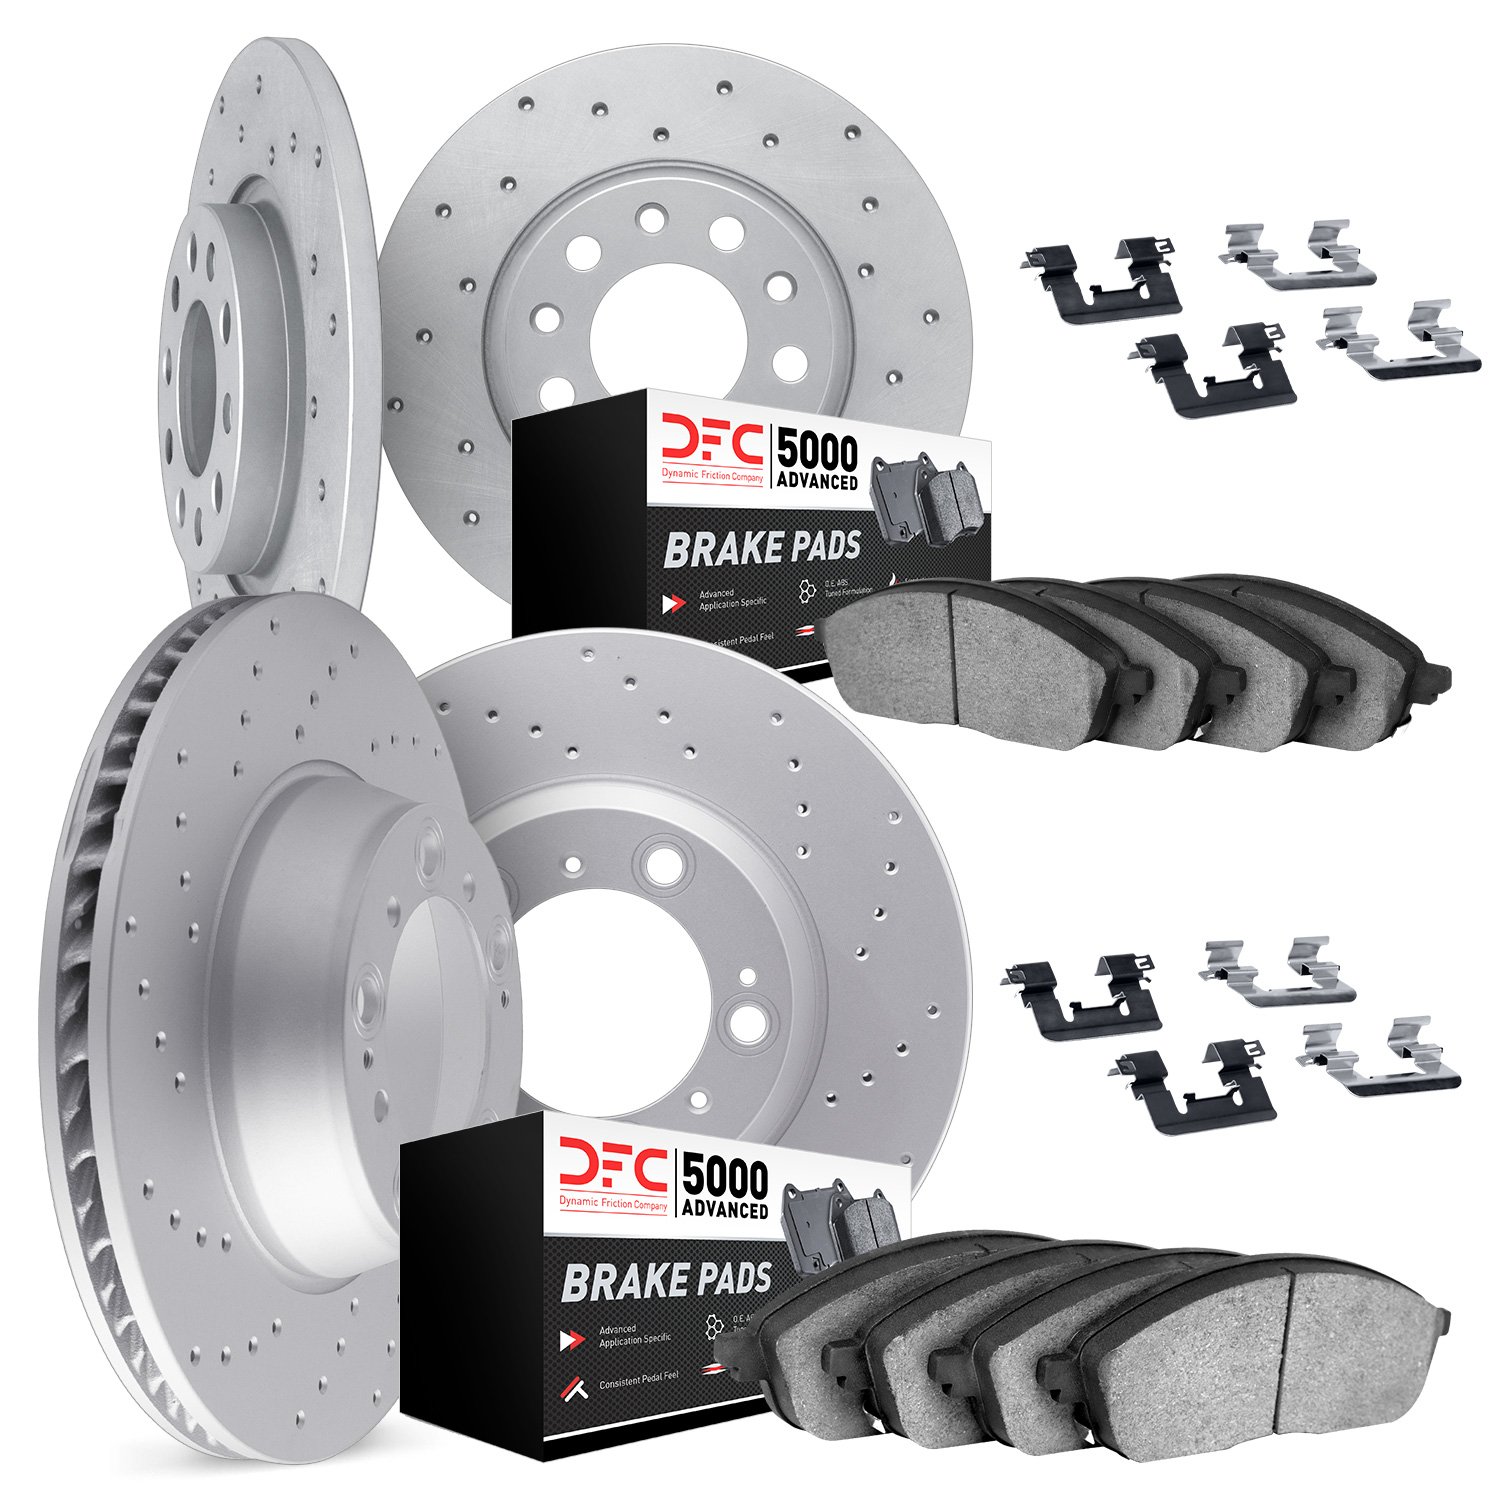 2714-58007 Geoperformance Drilled Brake Rotors with Active Performance Pads Kit & Hardware, 2004-2008 Acura/Honda, Position: Fro